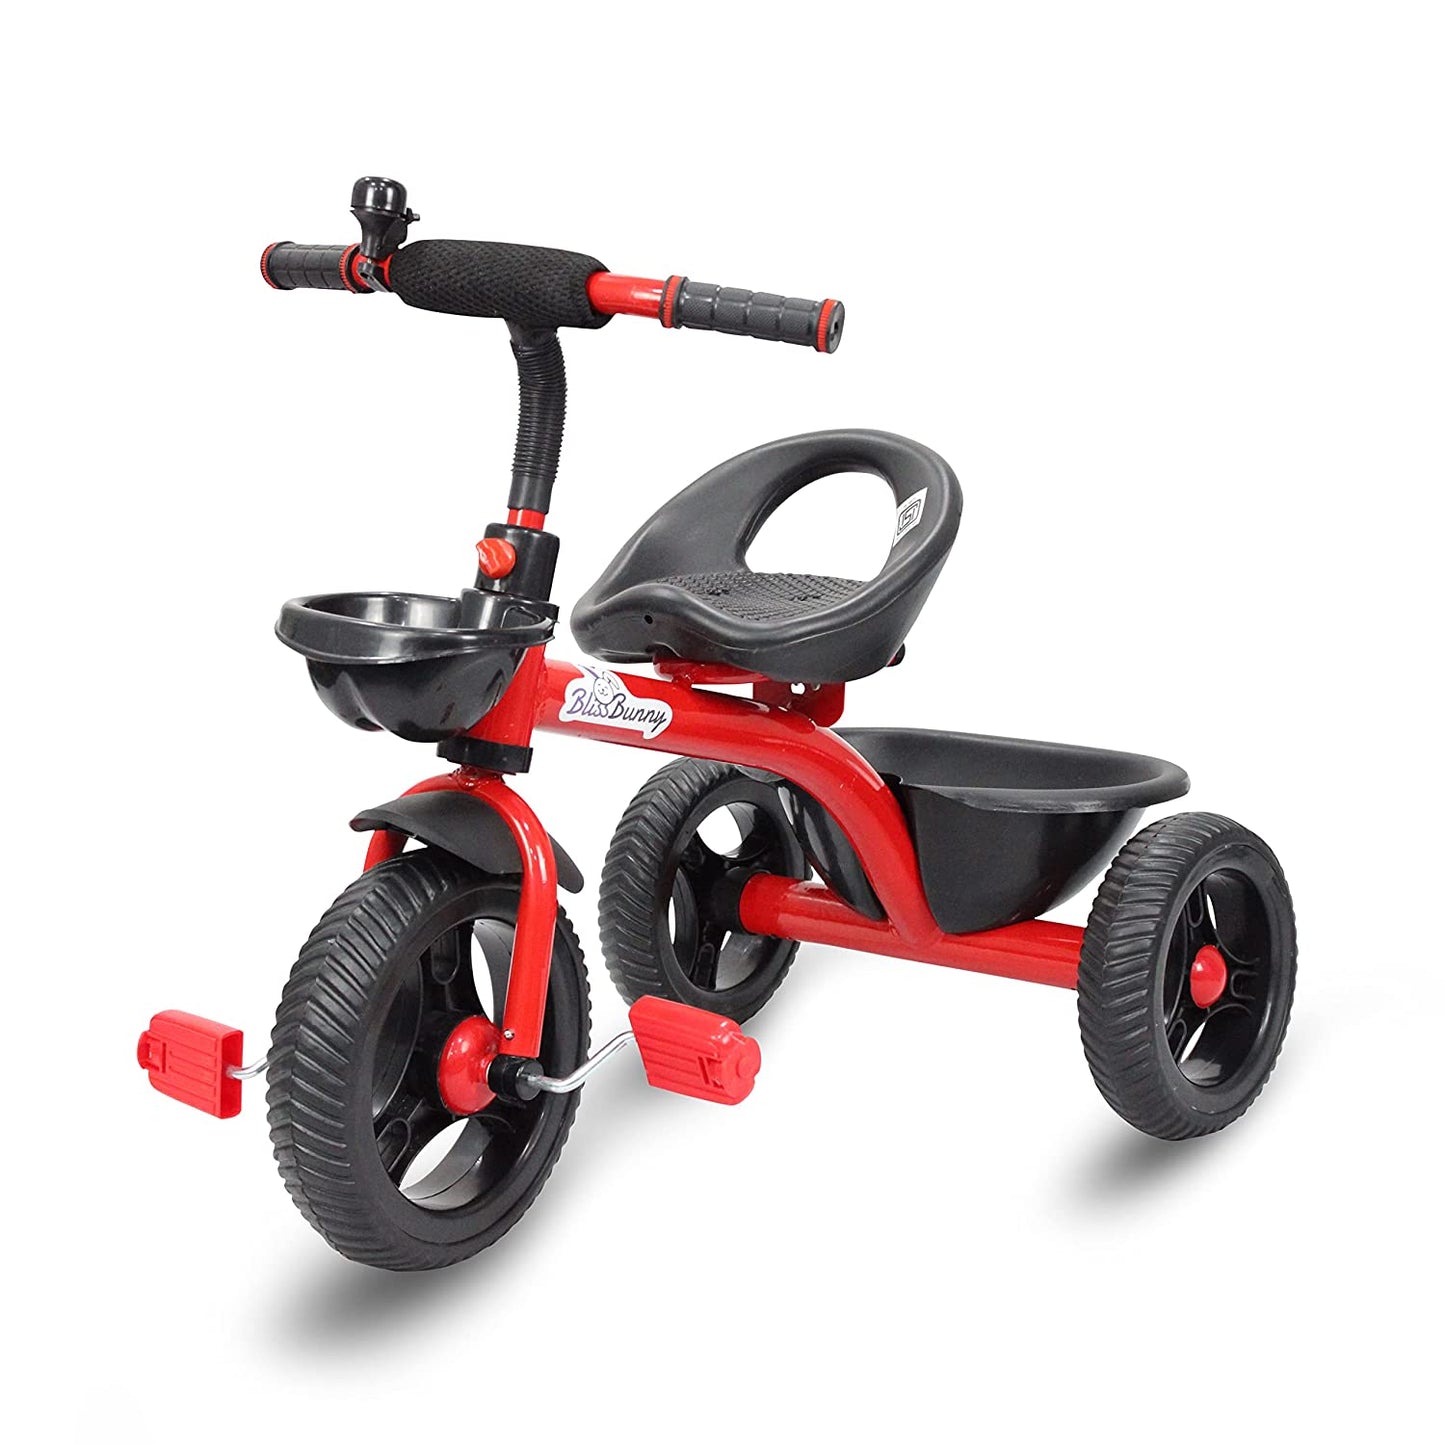 Trike Bike, Push Trike, Cycle-Super Duper Cool Tricycle For Your Toddler ( 3 to 6 Years) (Black, Red)